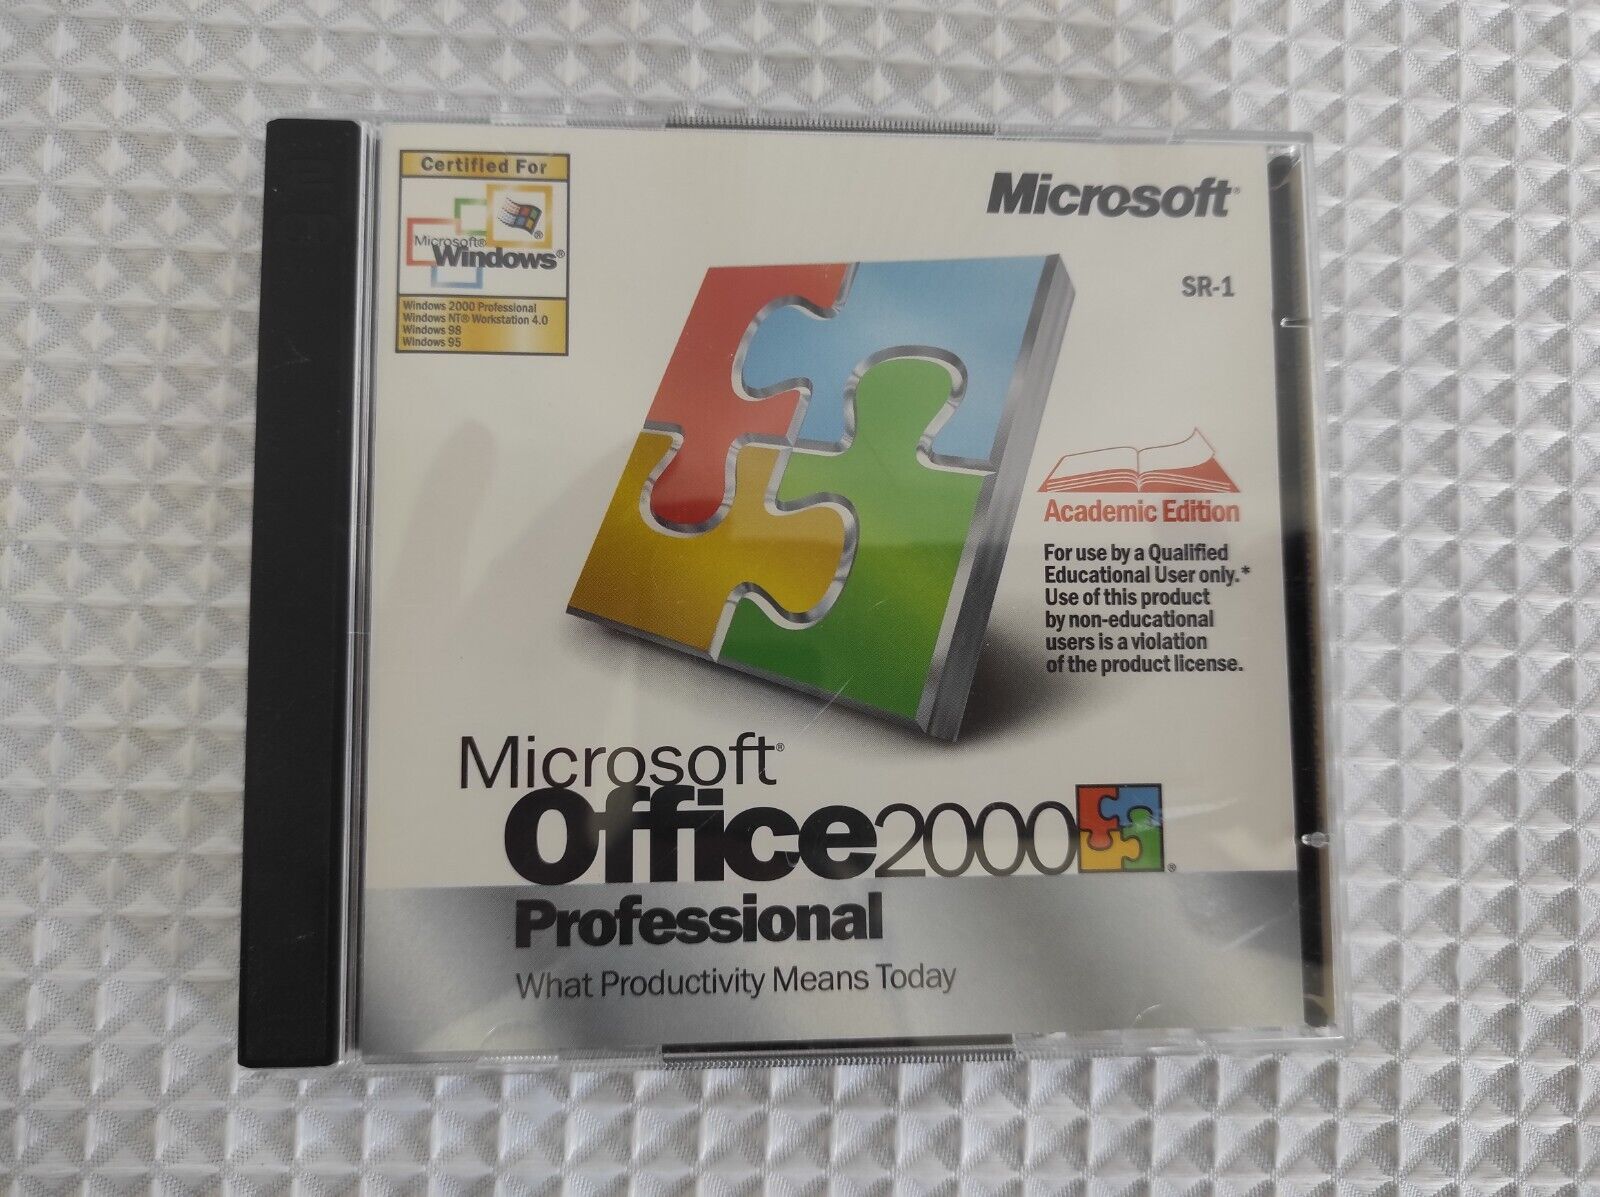 Microsoft Office 2000 Professional, Academic Edition, with COA